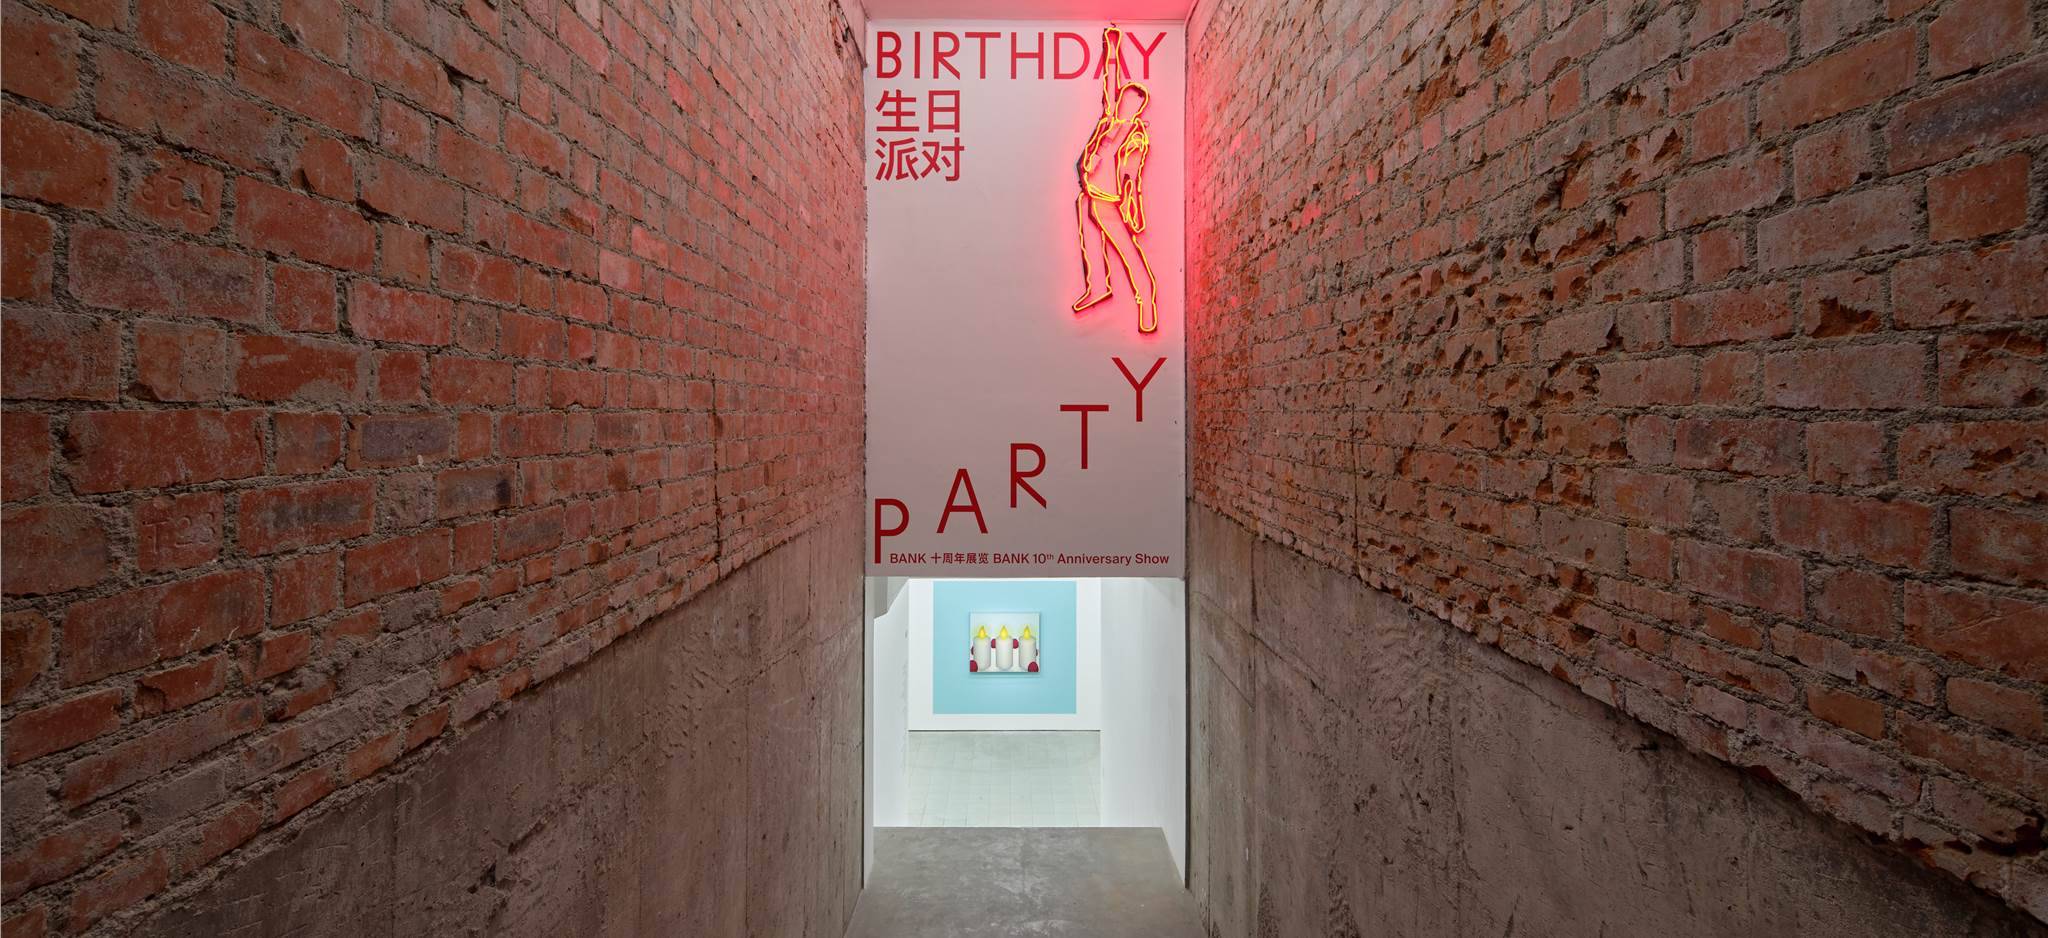 BANK 10th Anniversary Show "Birthday Party!"